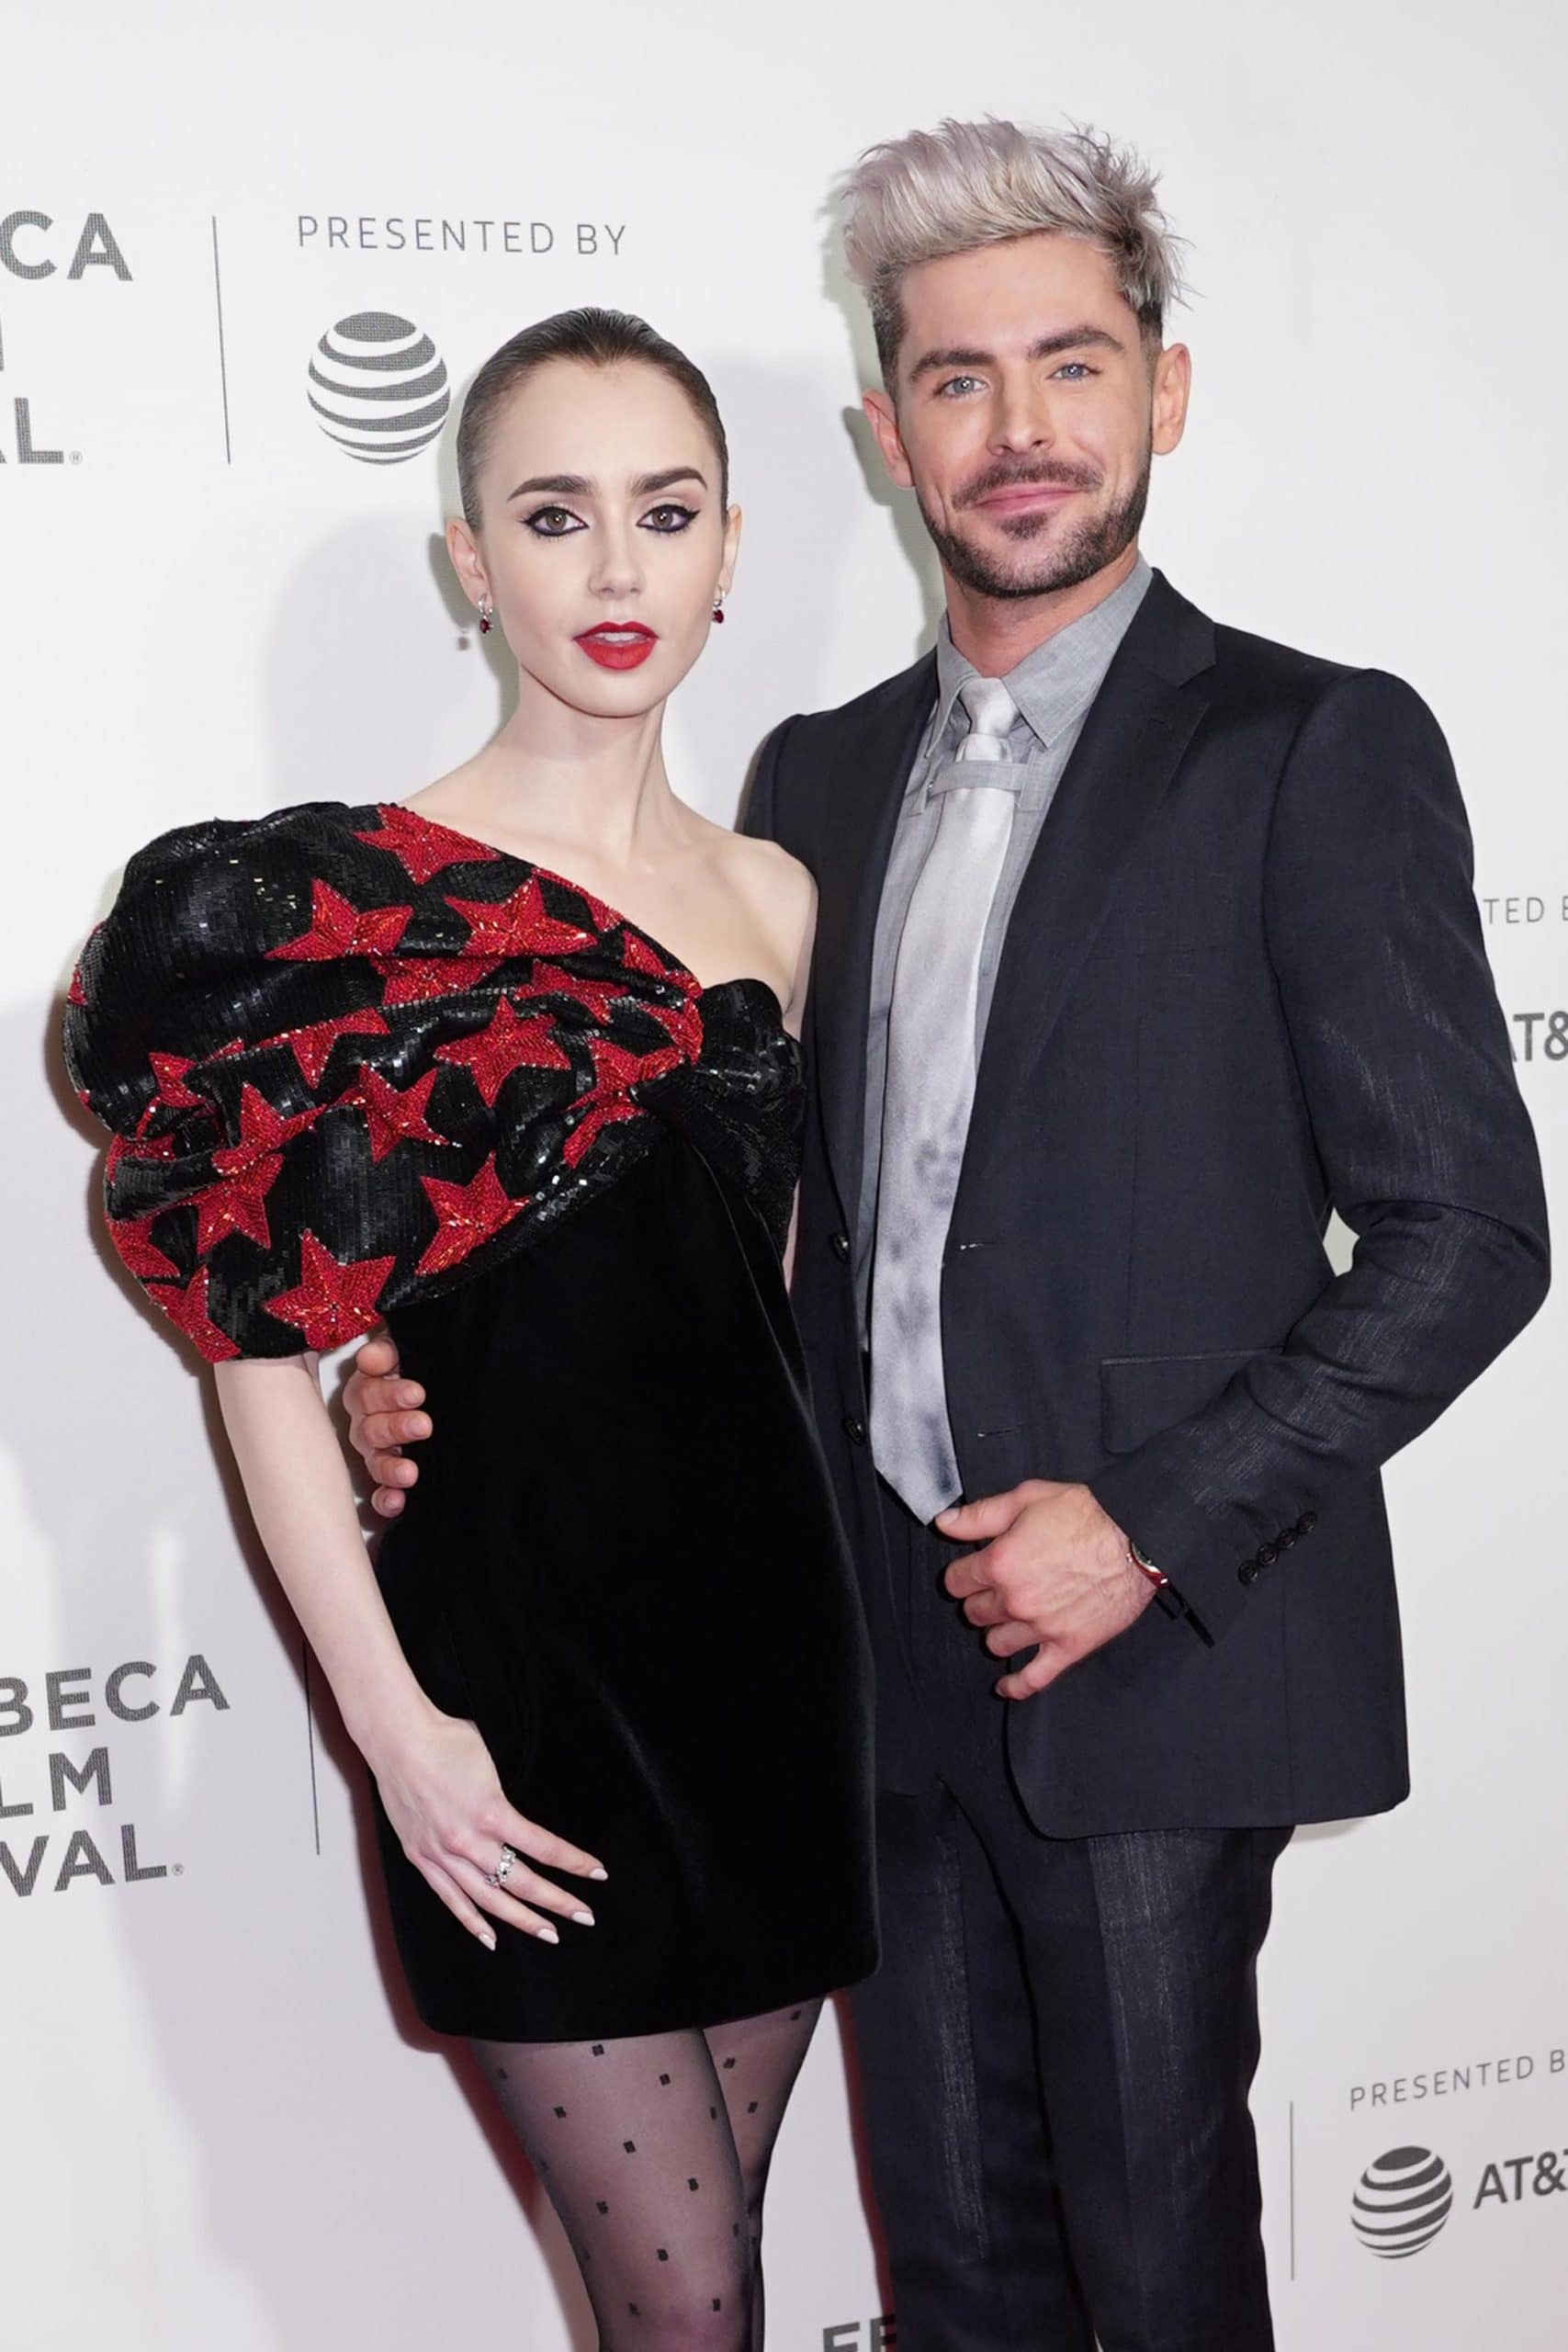 Lily Collins and Zac Efron, who dated casually in 2012, attend the screening of "Extremely Wicked, Shockingly Evil and Vile"